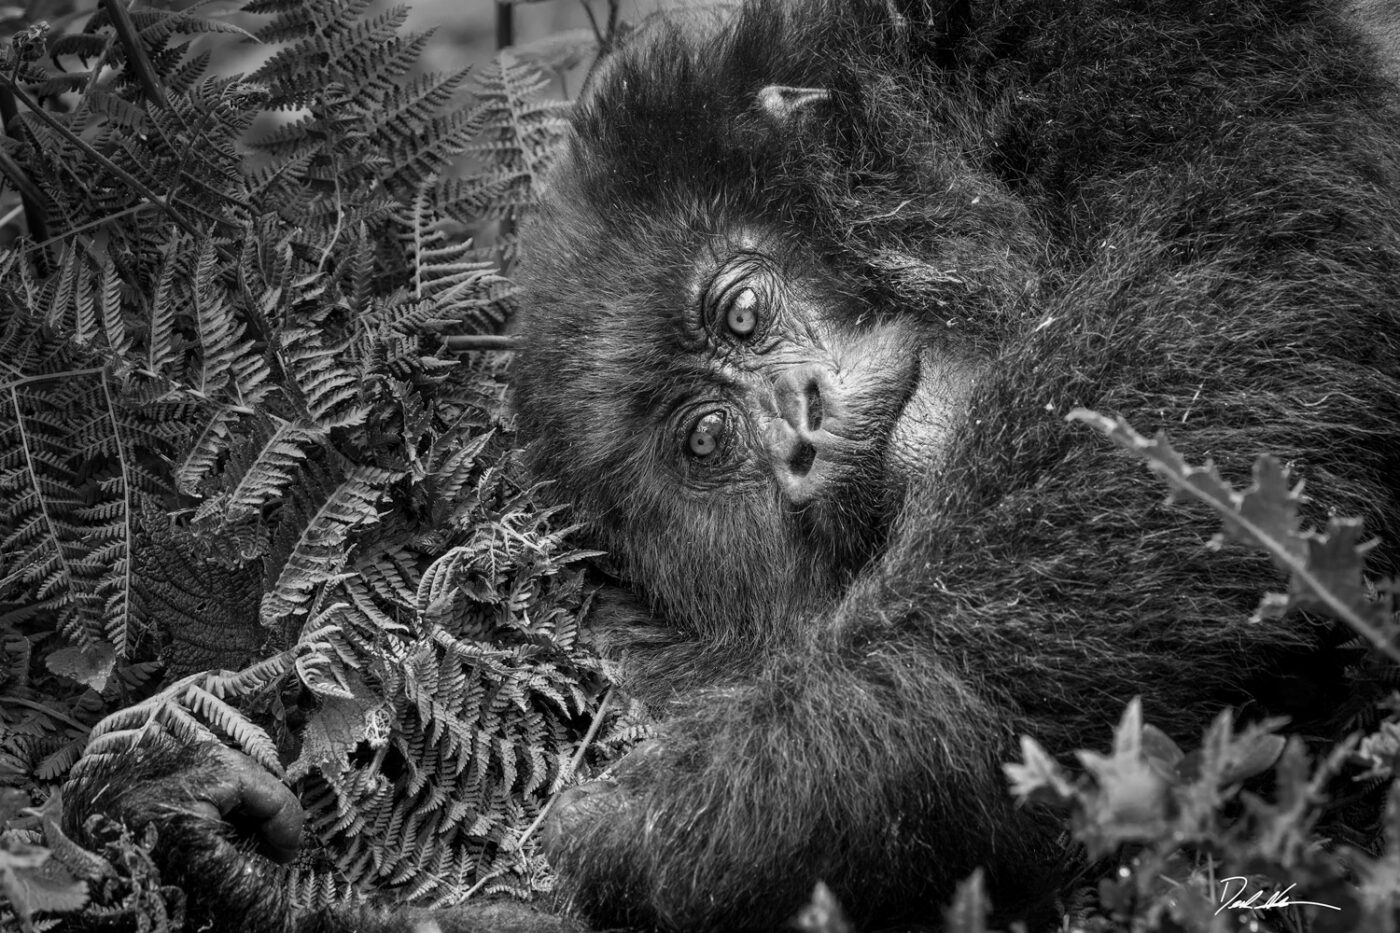 Black and white image of a mountain gorilla laying in the forest looking at its hand